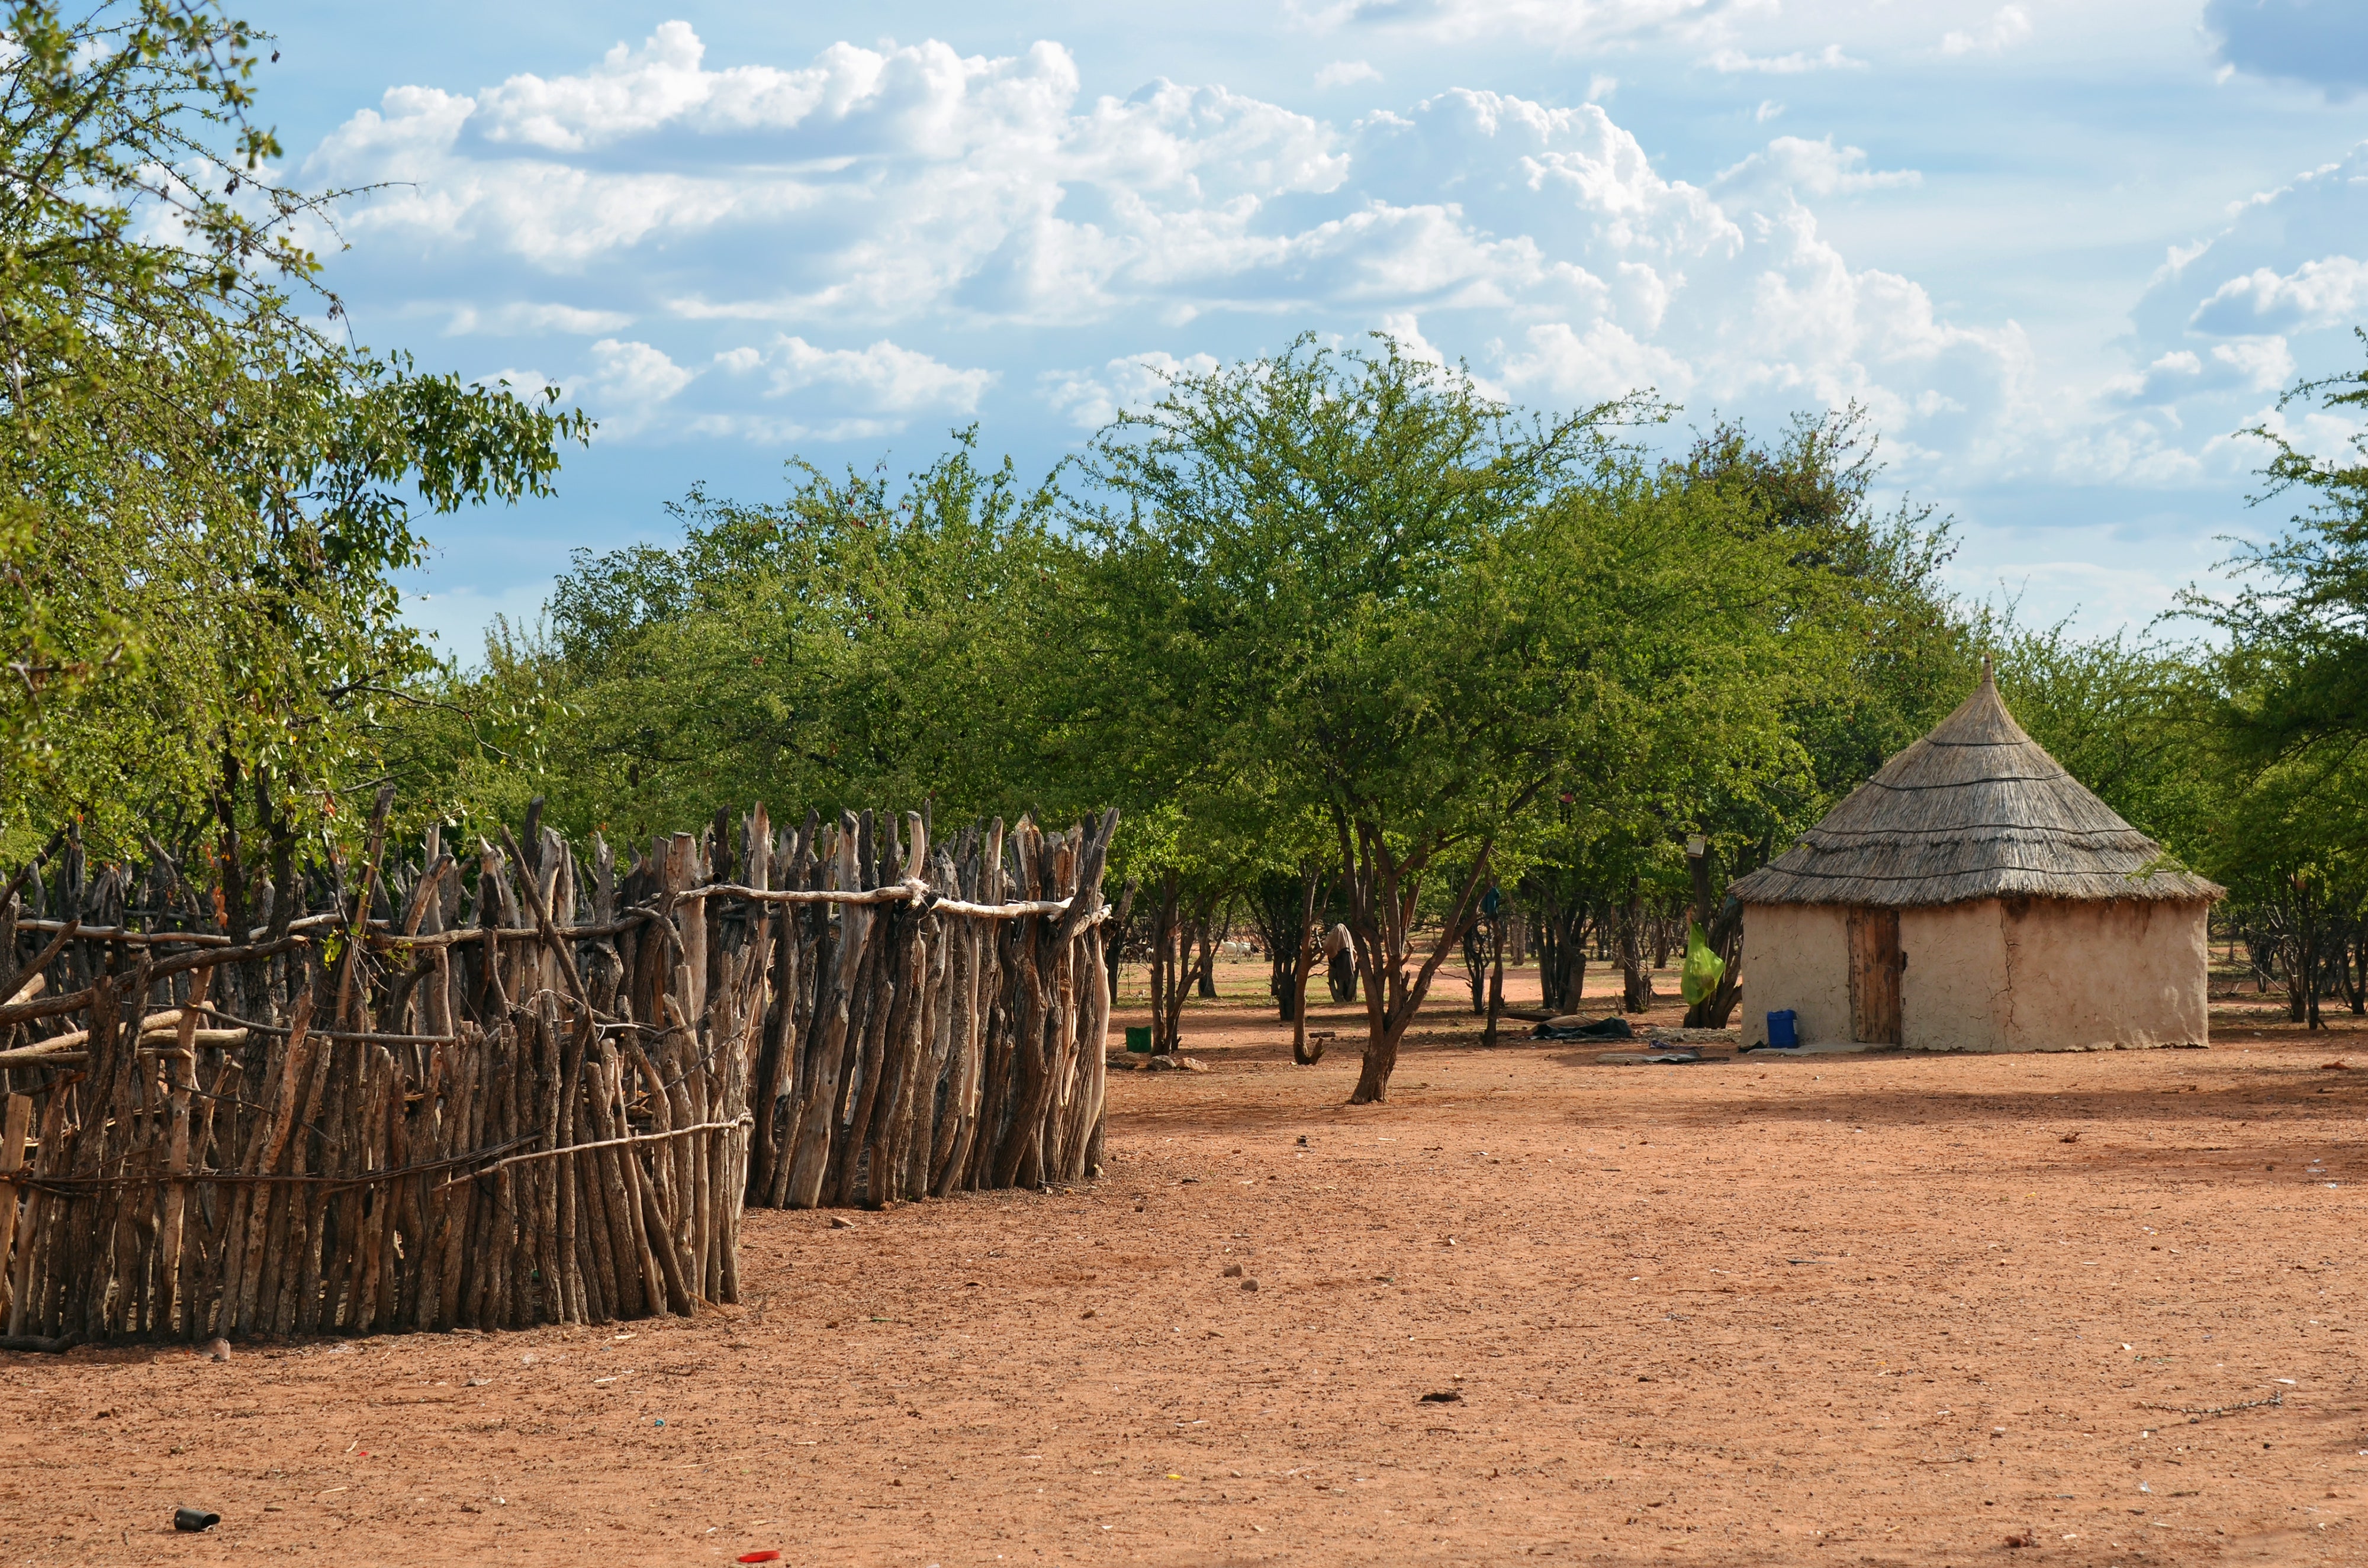 If you travel through the Zambezi Strip of Namibia, you’ll see villages of round mud huts topped with conical thatched roofs. These examples of vernacular architecture are found throughout the continent and utilize readily available materials. Many of the river lodges in the area, which cater to tourists on river safaris or exploring nearby game parks, also feature thatched roofs.<p>Sign up for our newsletter to get the latest in design, decorating, celebrity style, shopping, and more.</p><a href="https://www.architecturaldigest.com/newsletter/subscribe?sourceCode=msnsend">Sign Up Now</a>